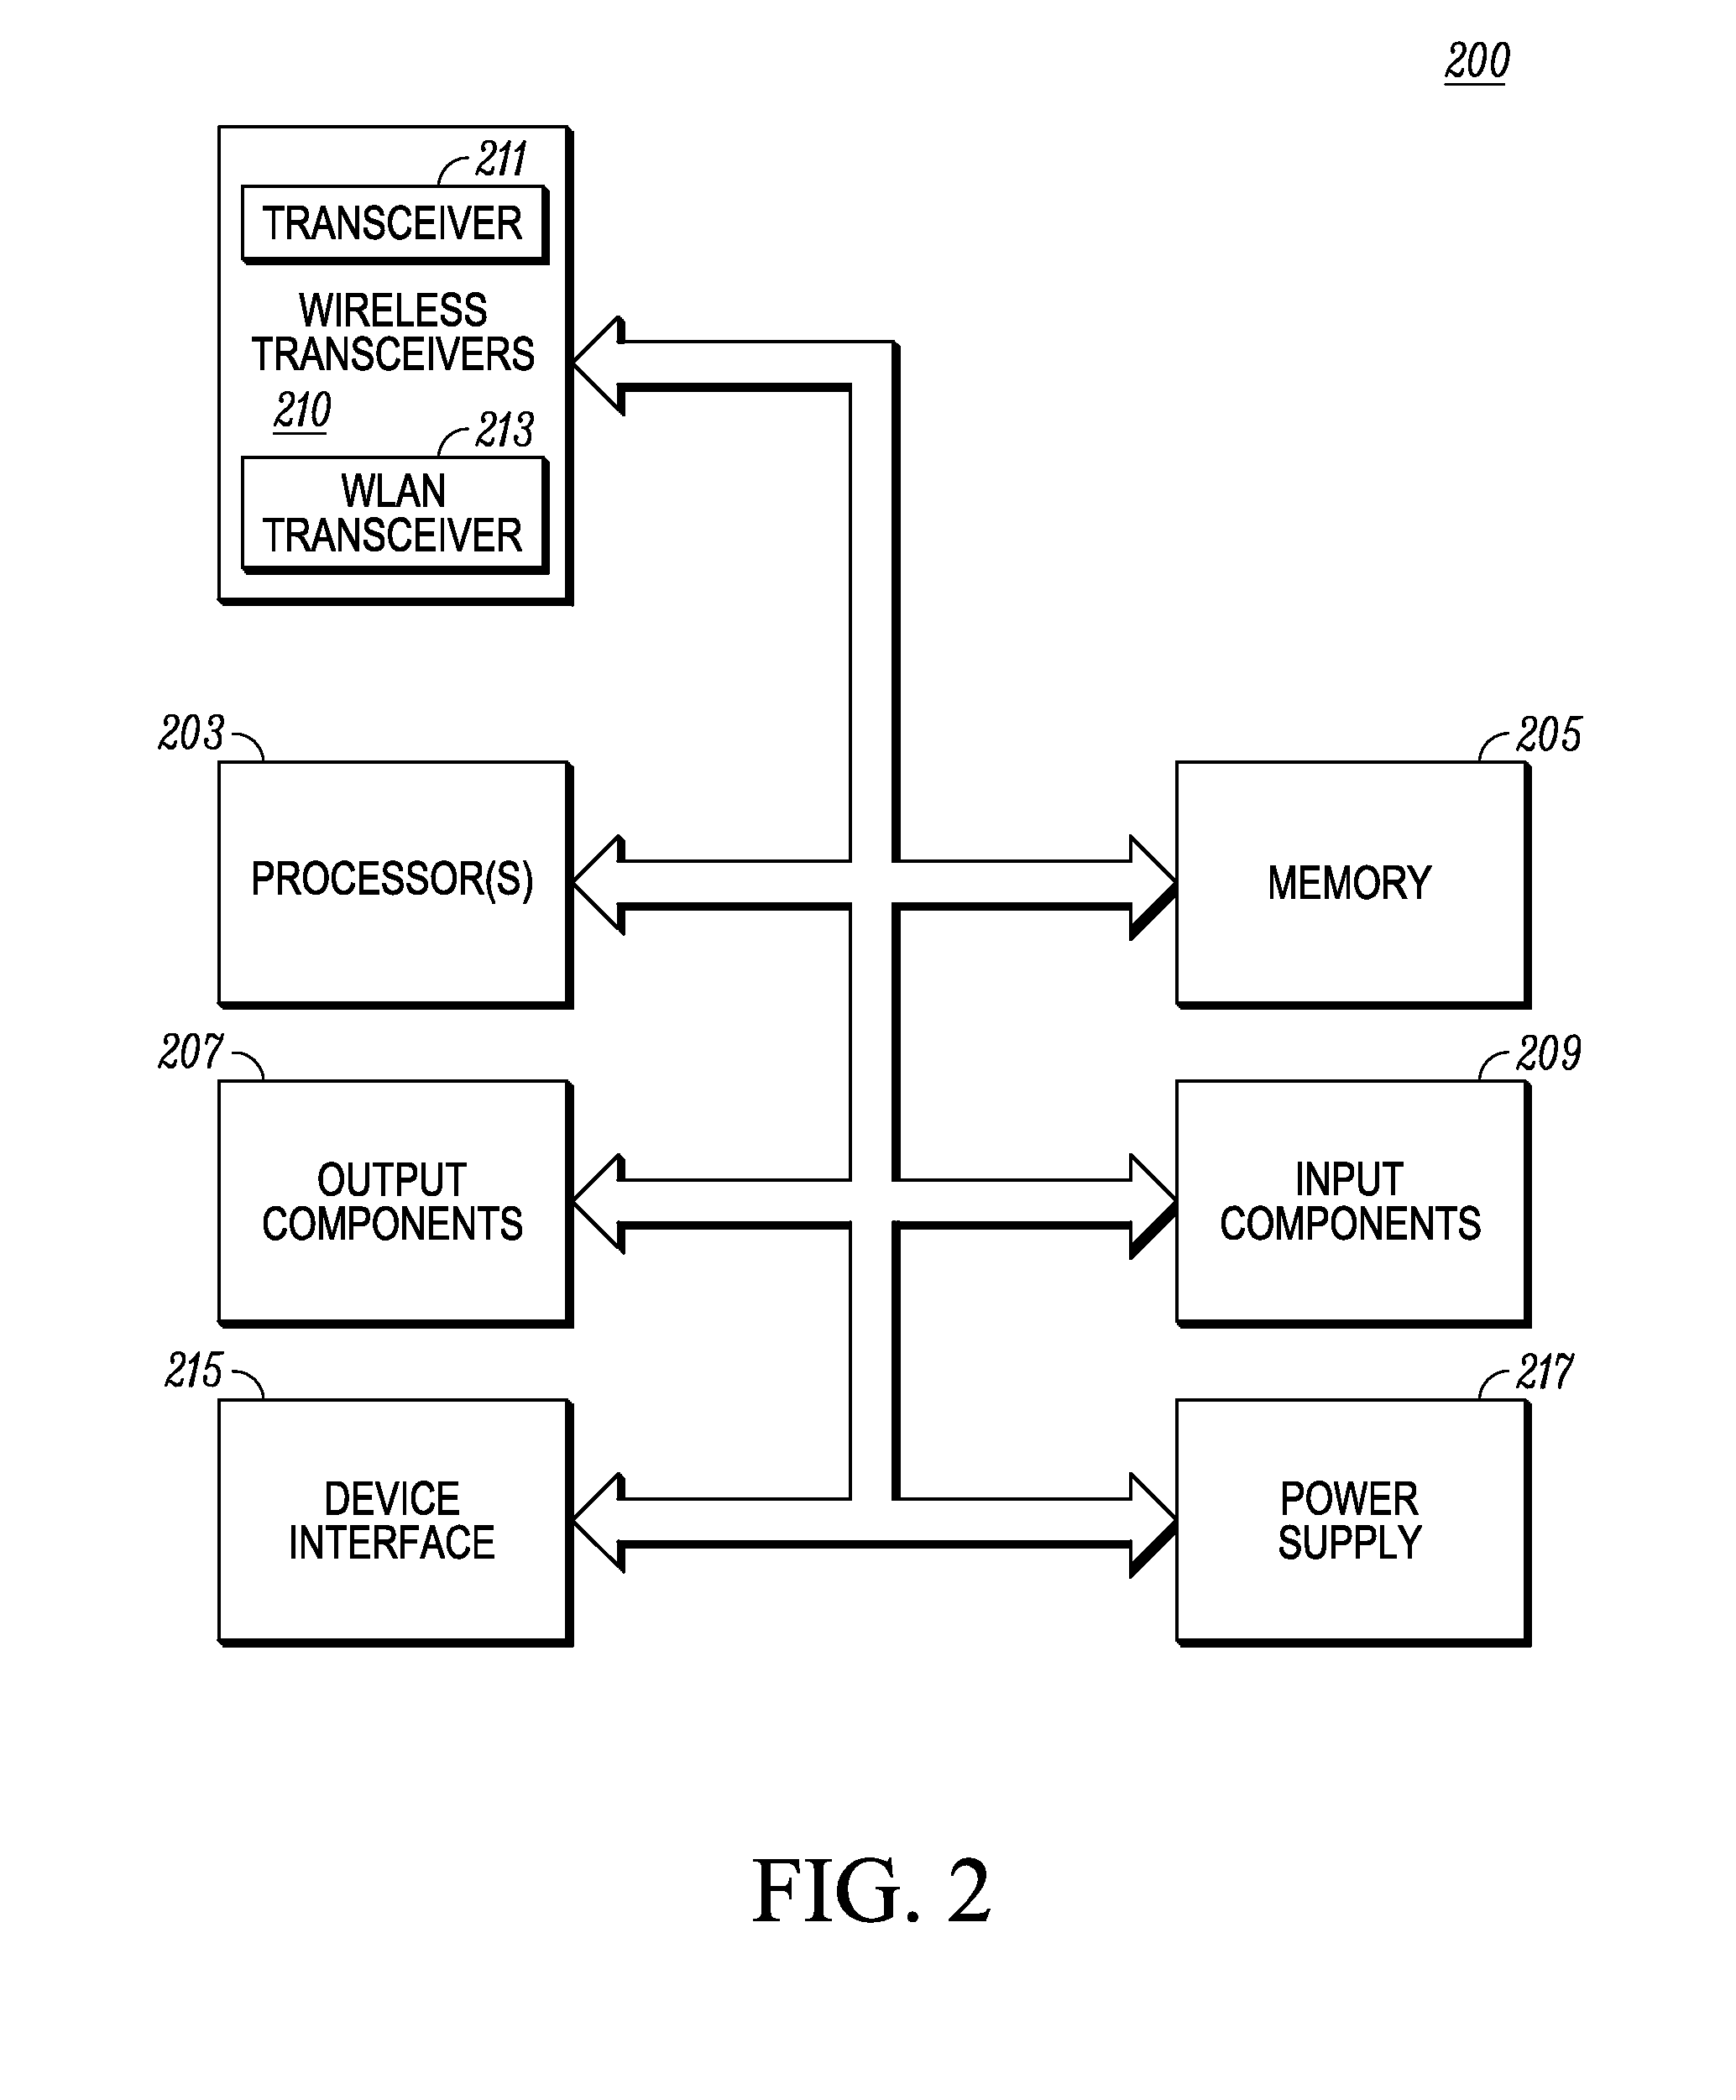 Method for an Electronic Device for Providing Group Information Associated with a Group of Contacts